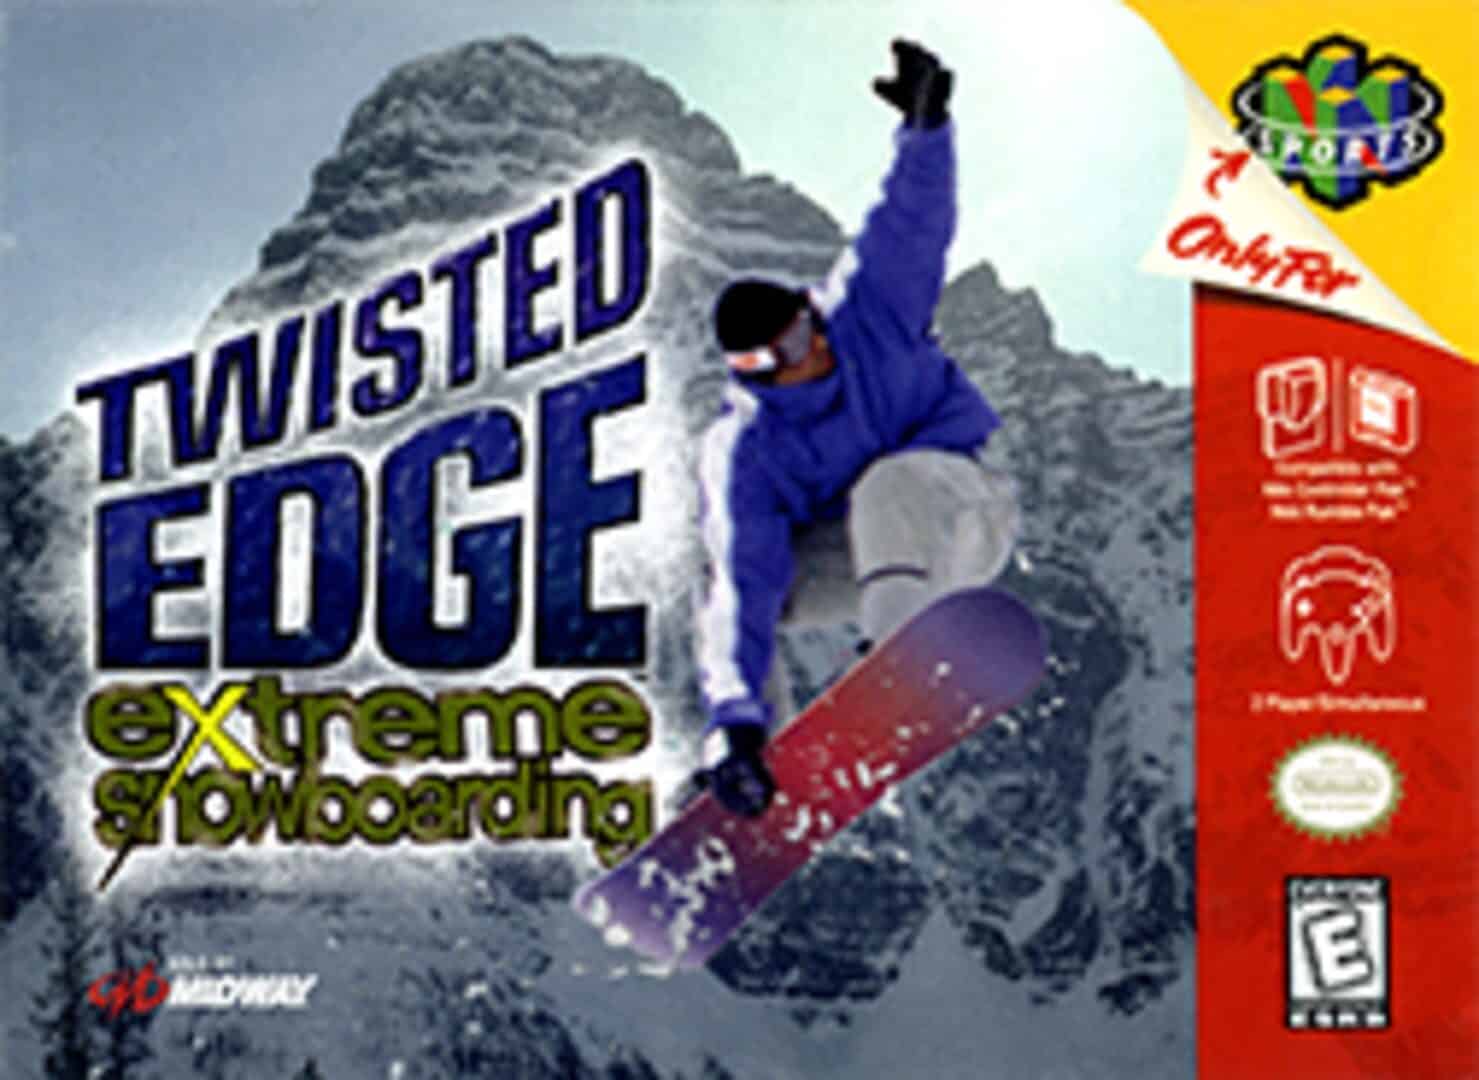 King Hill 64: Extreme Snowboarding